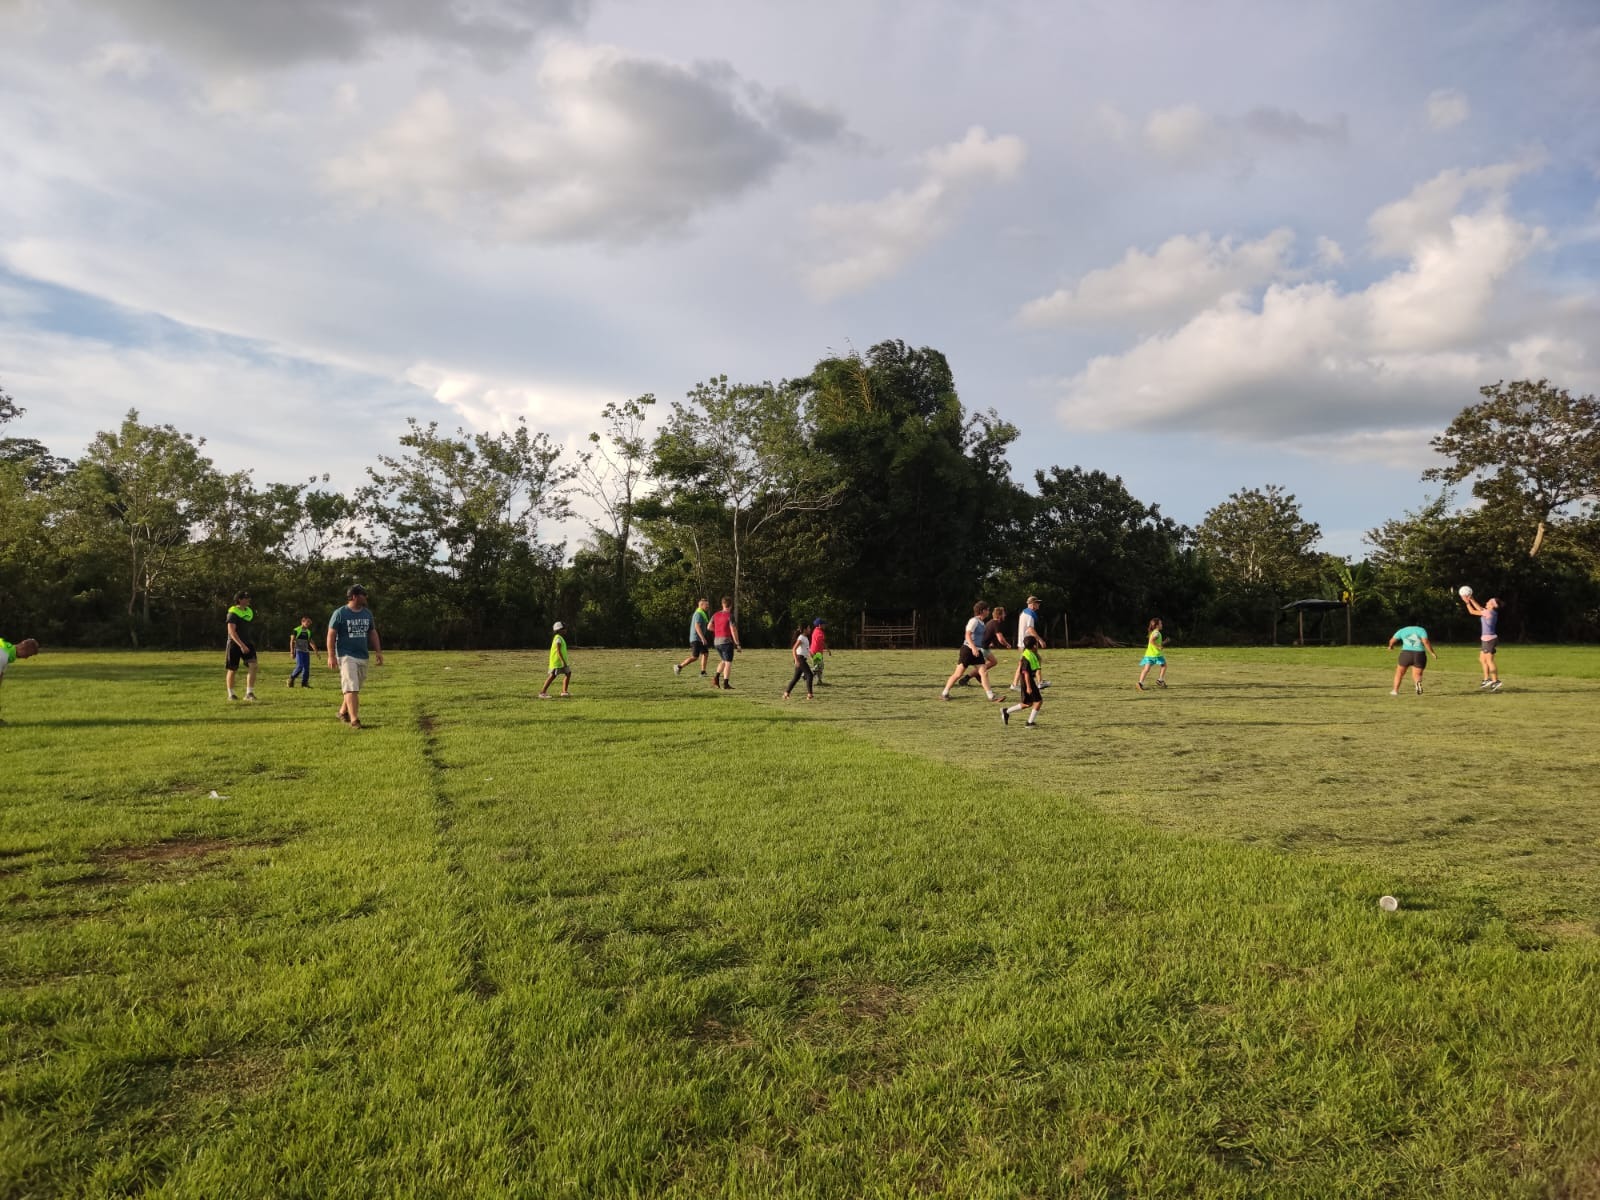 Finishing the day with Futból